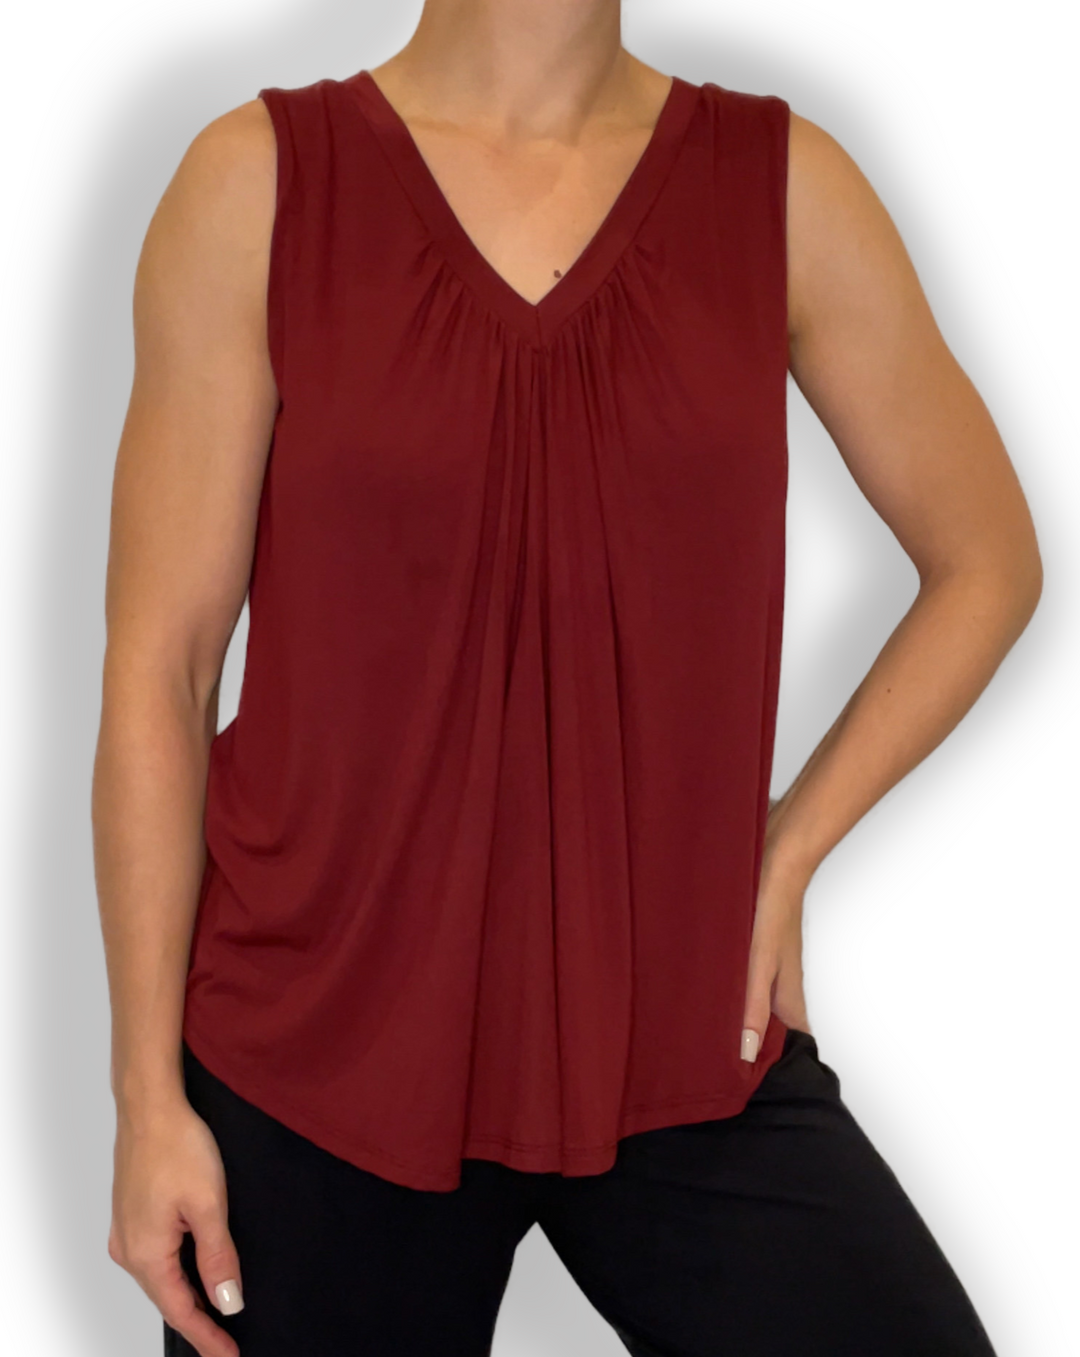 Jia+Kate braless bamboo top in maroon color Ashley style